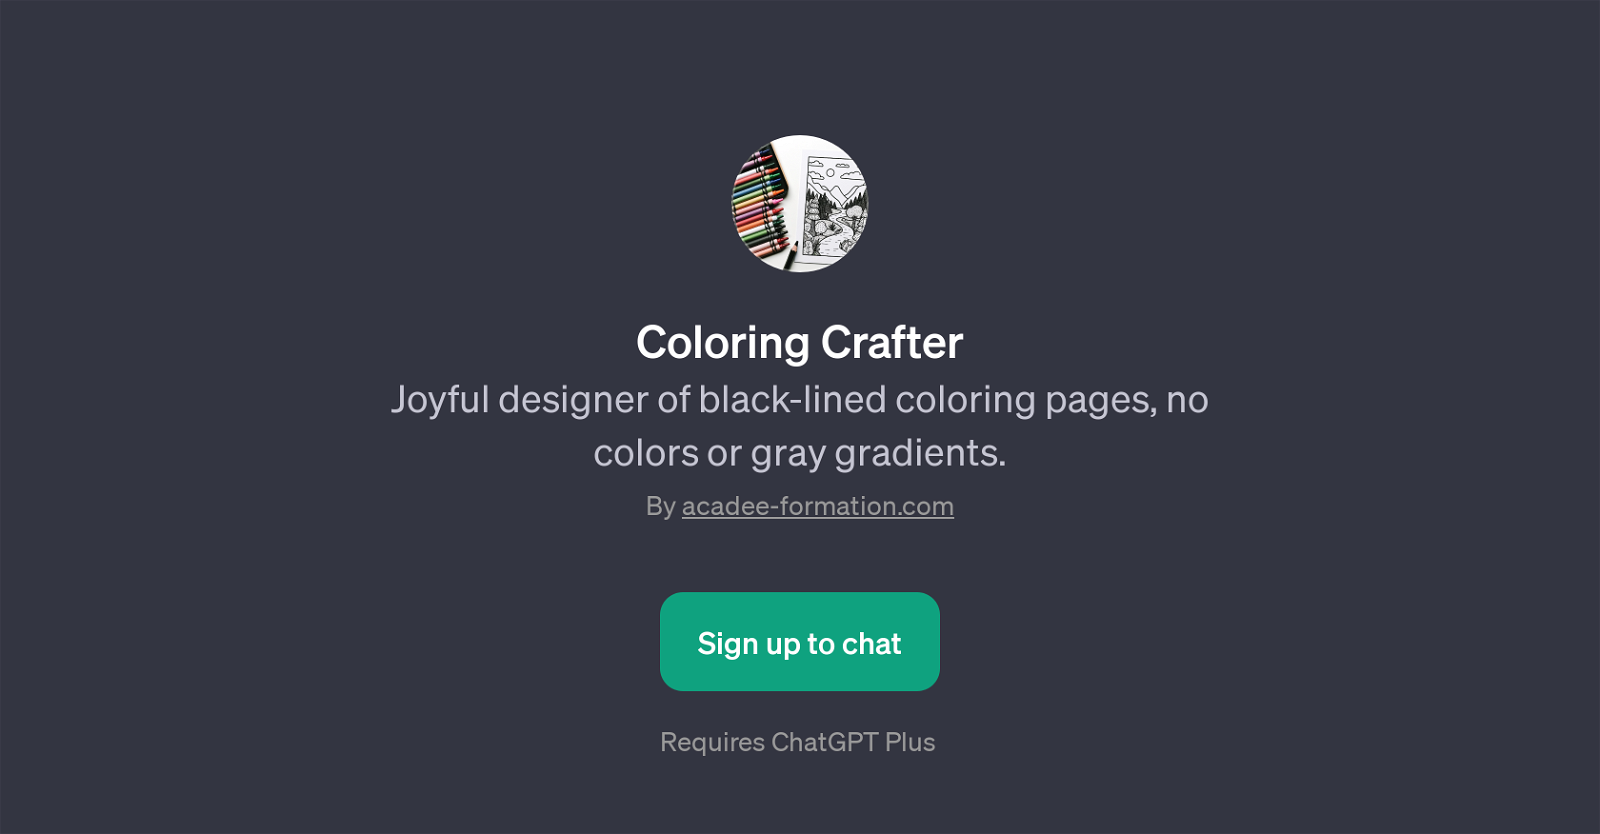 Coloring Crafter website